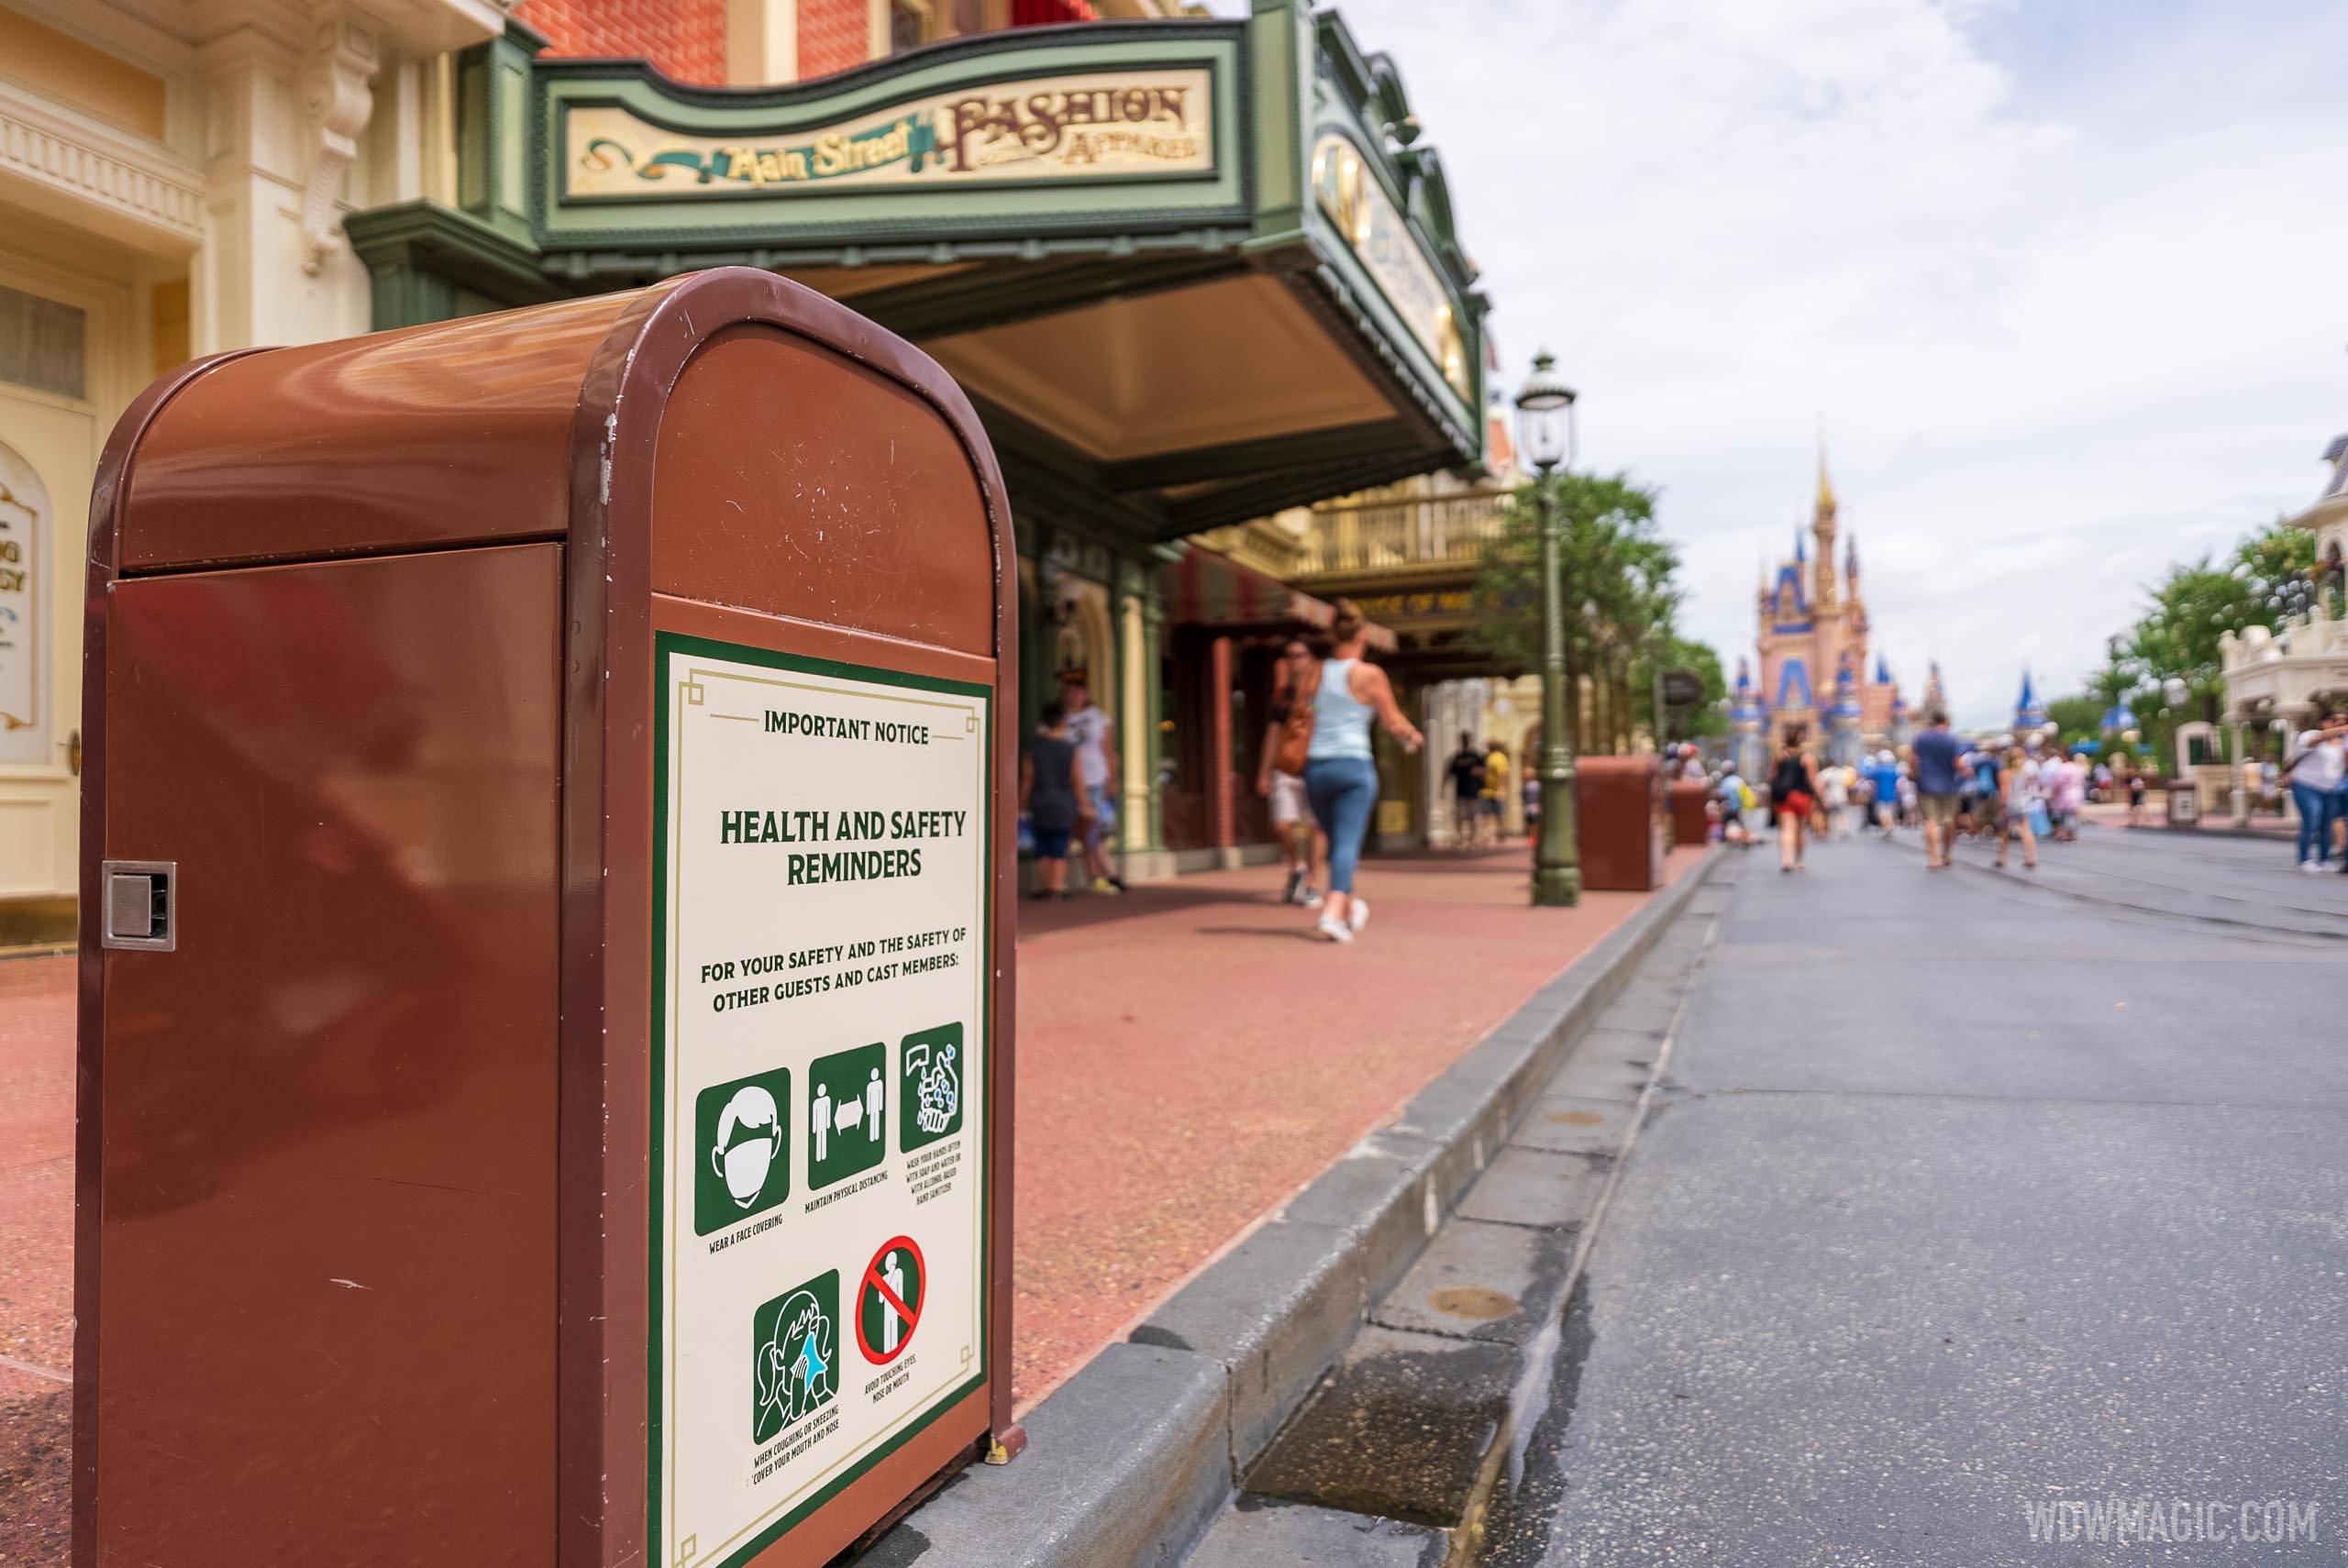 Health and safety reminders on Main Street U.S.A. just a few days ago